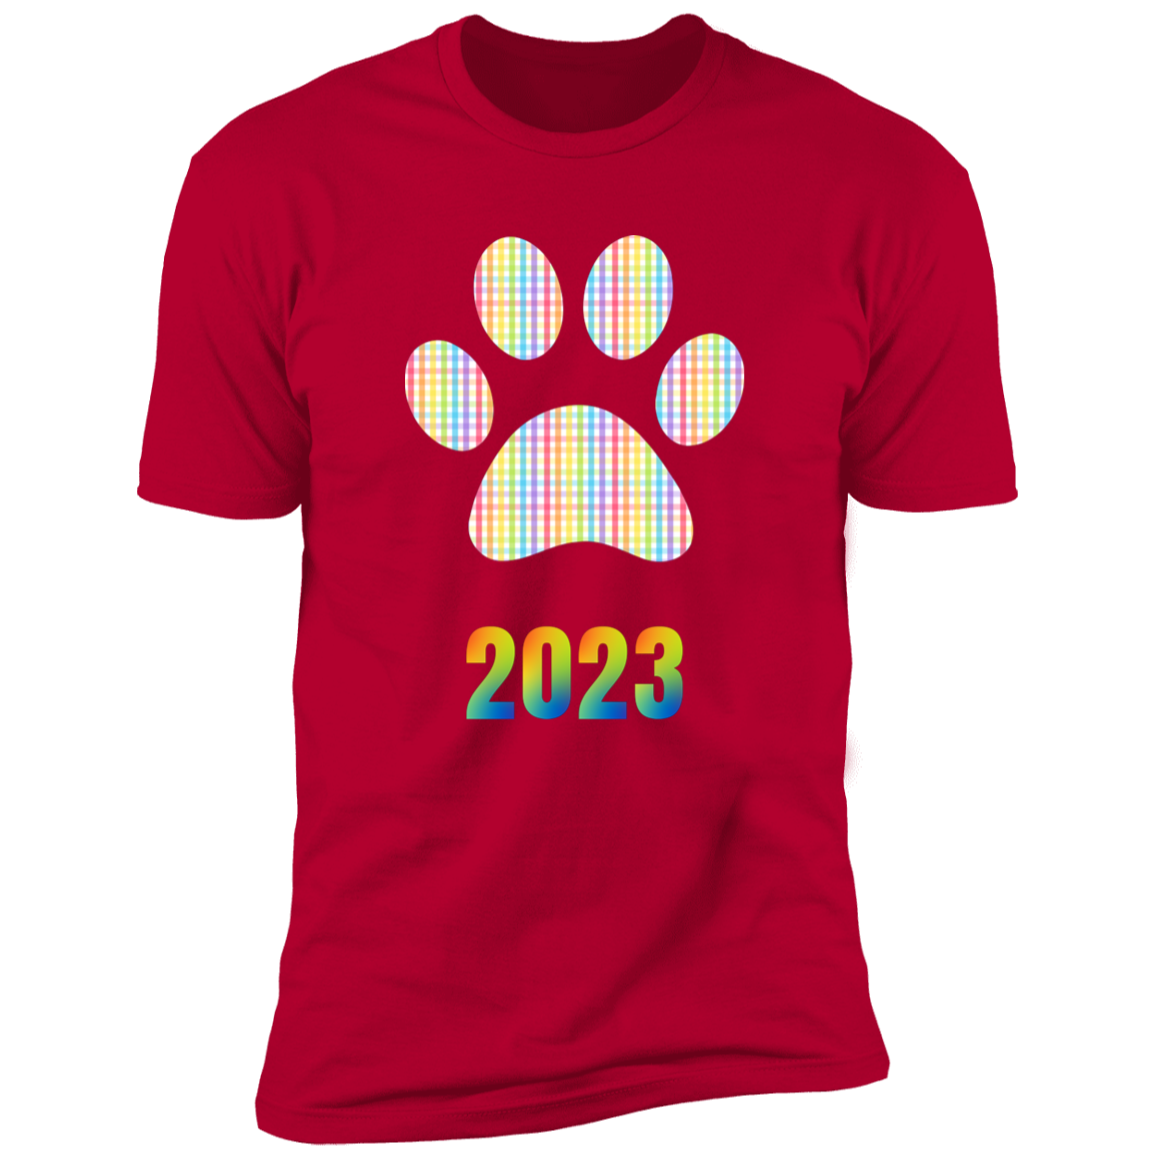 Pride Paw 2023 (Gingham) Pride T-shirt, Paw Pride Dog Shirt for humans, in red